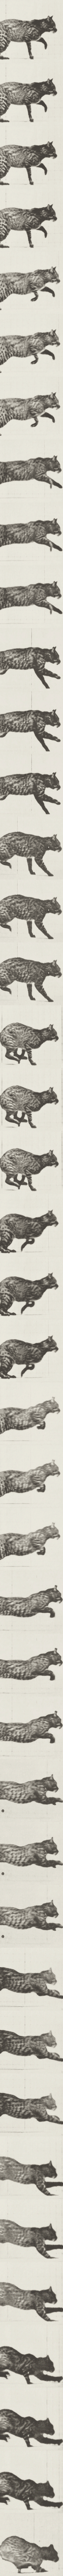 After Muybridge - Cat Trotting collection image